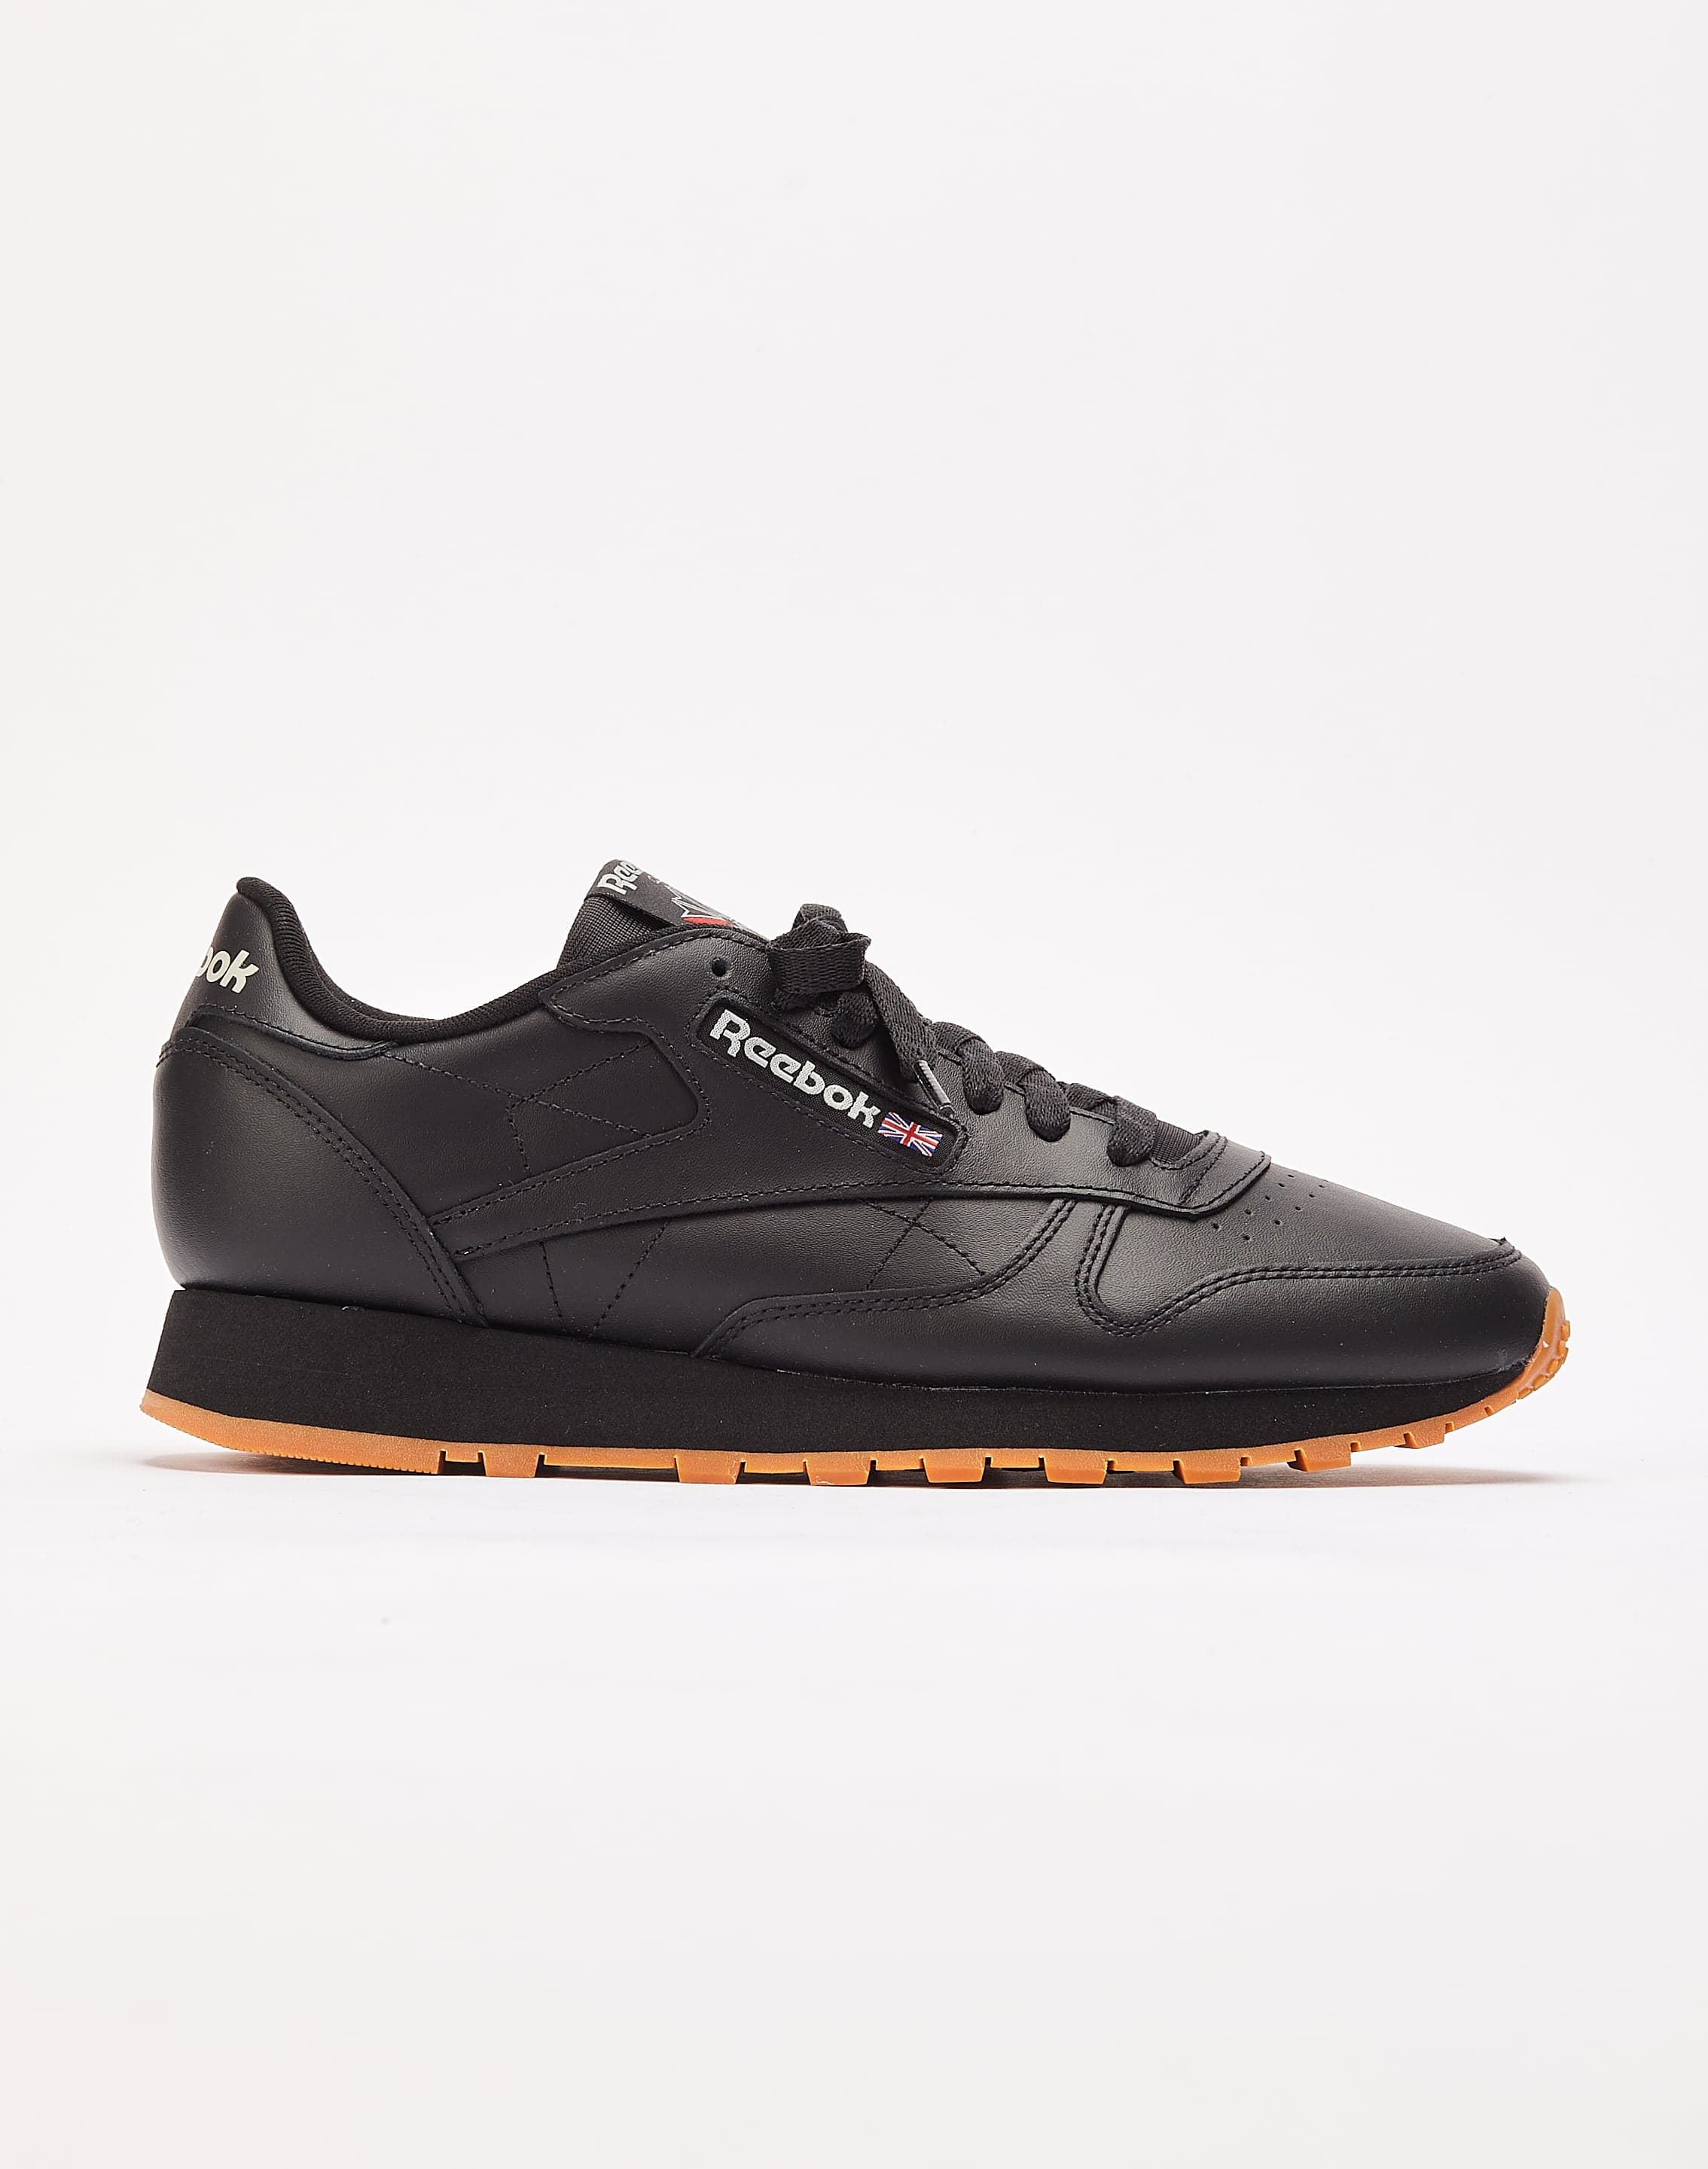 Reebok Classic Leather – DTLR